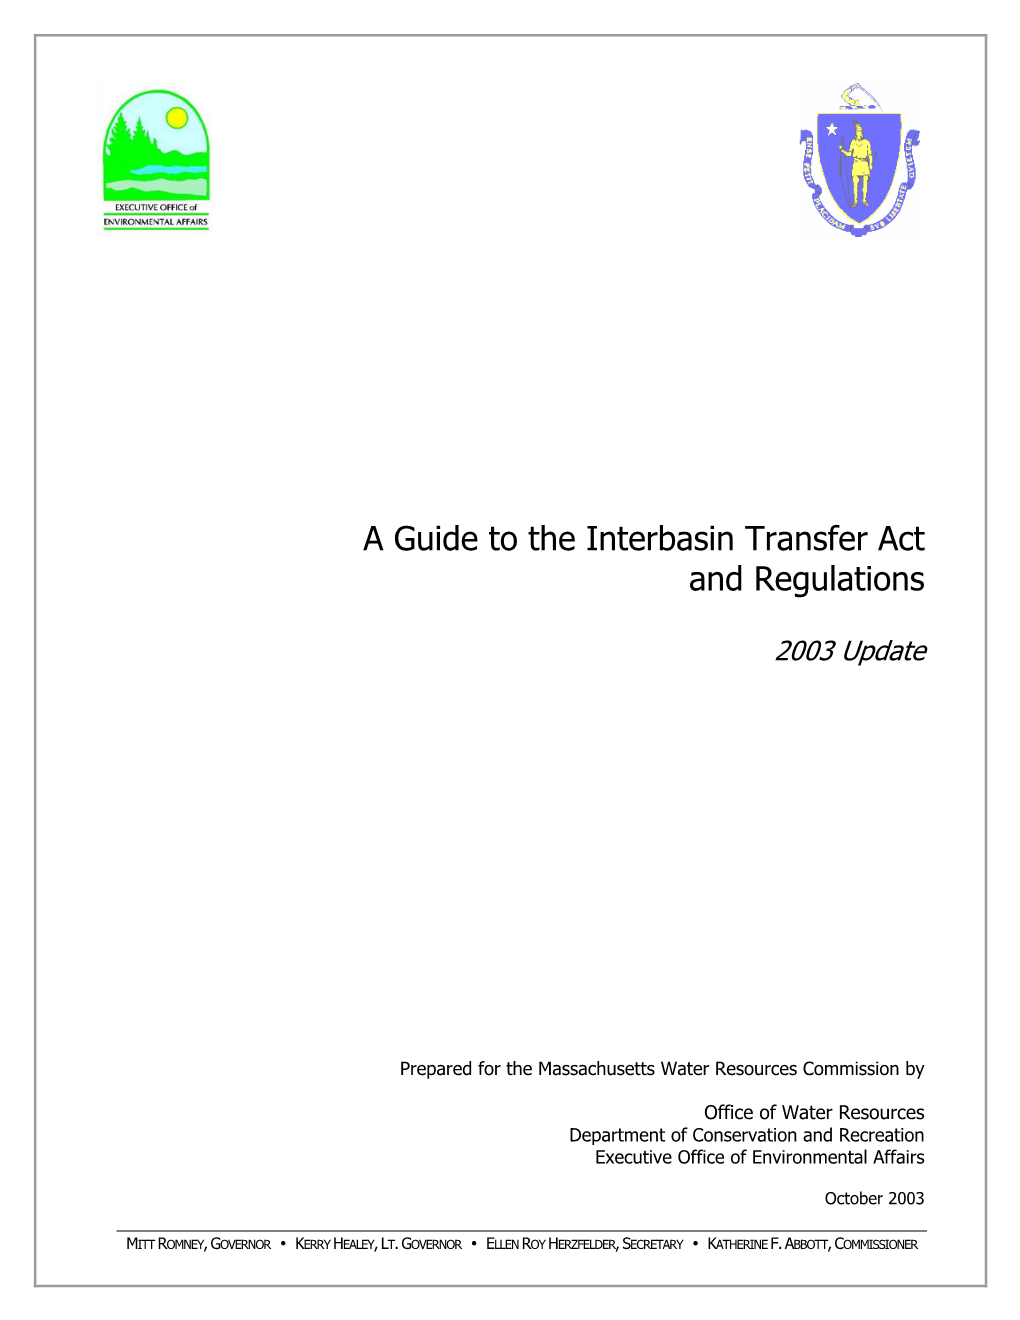 A Guide to the Interbasin Transfer Act and Regulations